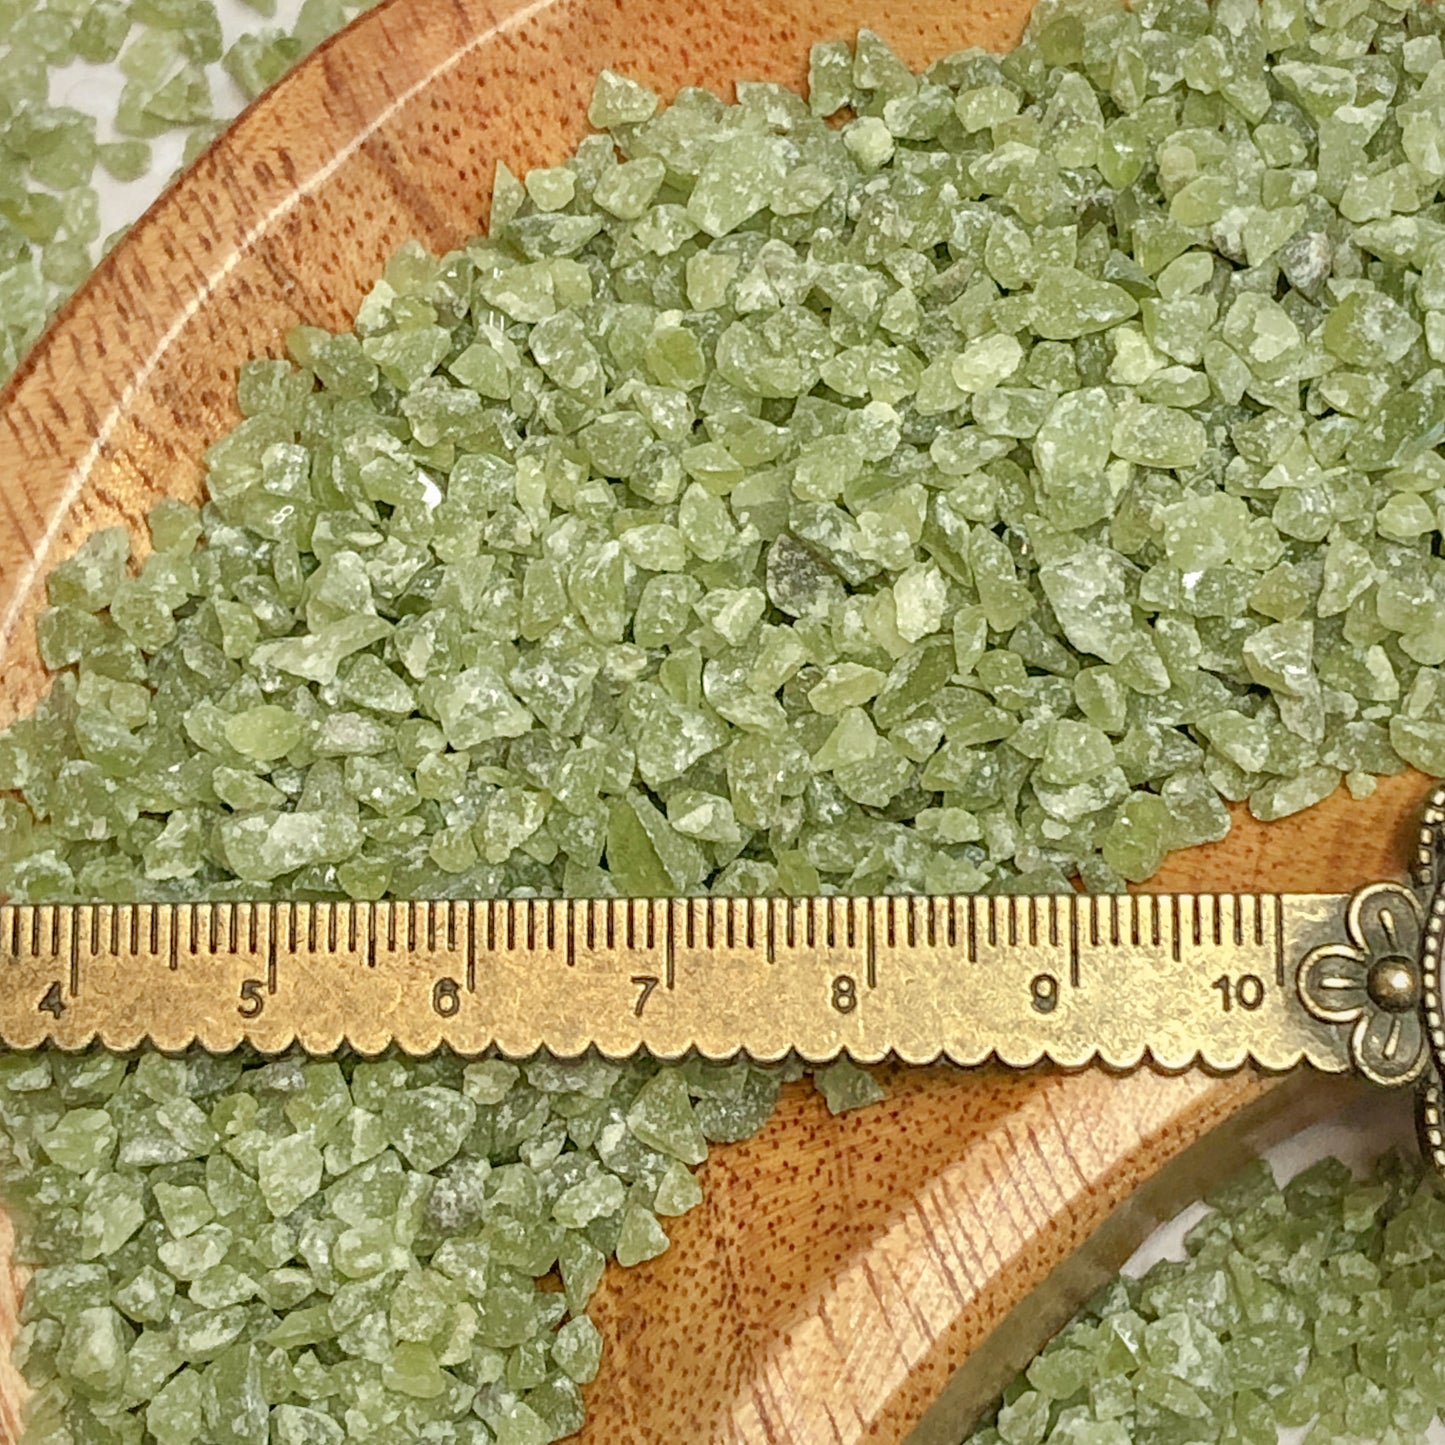 Crushed RARE Gemmy Green Idocrase (Grade A+) from Kenya, Coarse Crush, Gravel Size (4mm - 2mm) for Metaphysical Projects, Resin Art, Inlay or Jewelry